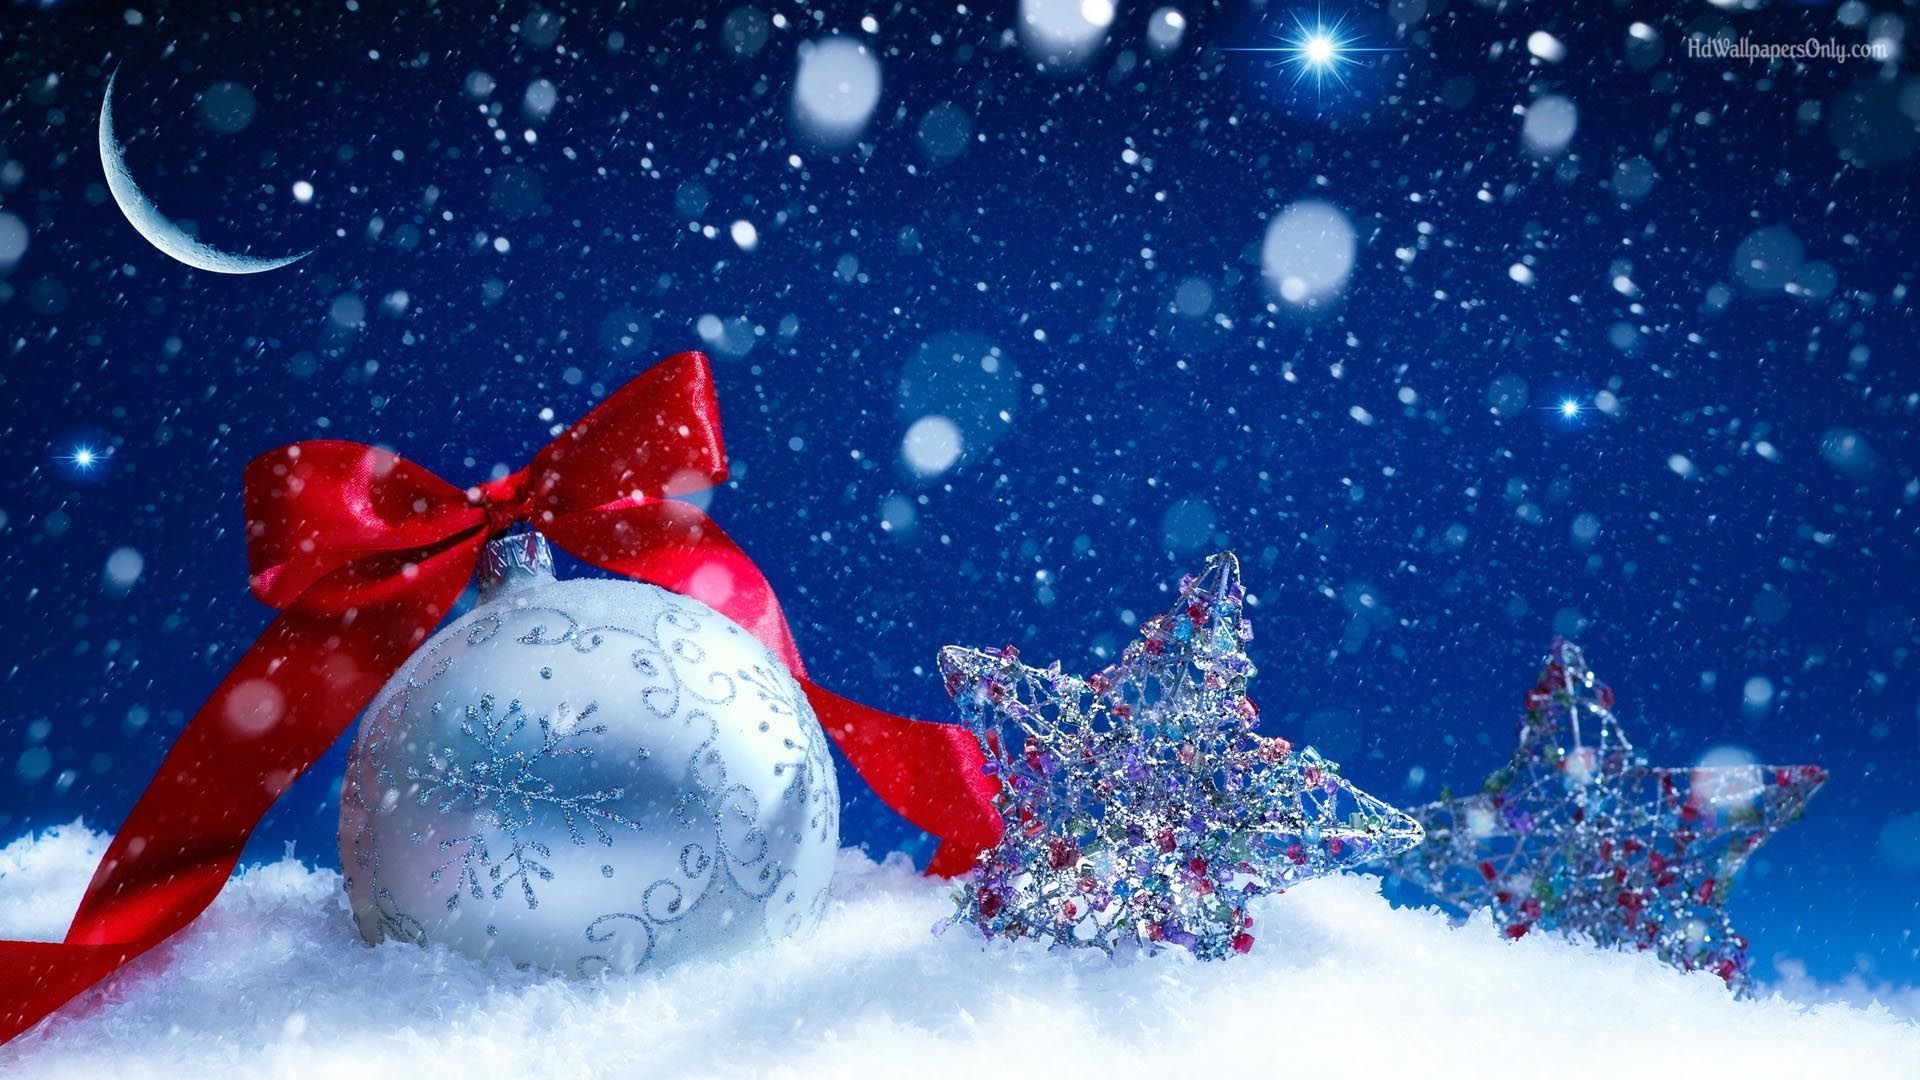 Free download Download Xmas Wallpaper Hd 33 Wallpaper For your screen